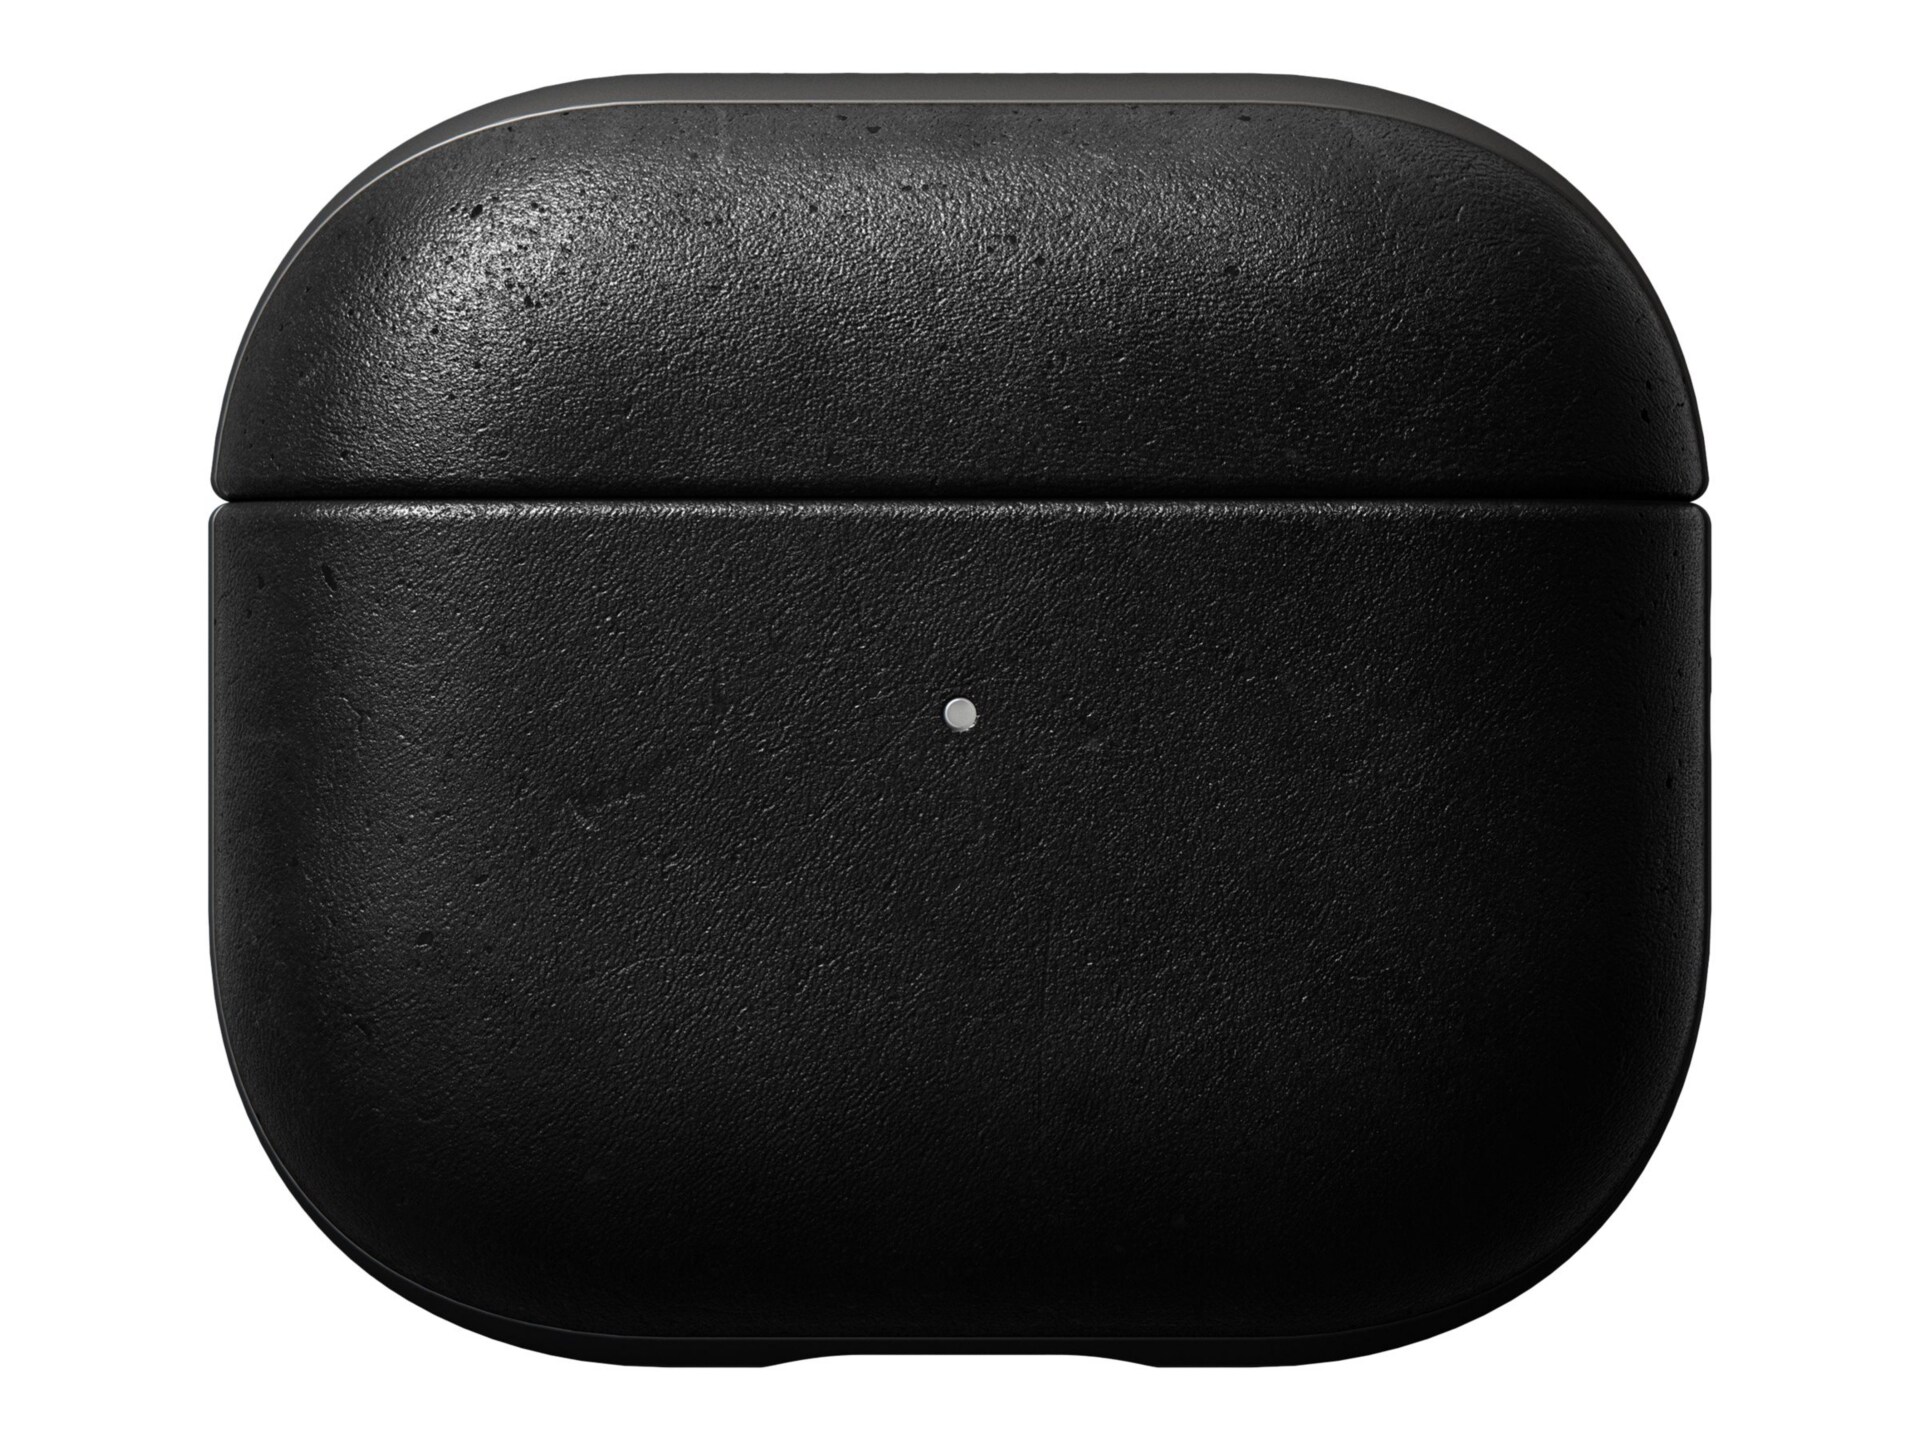 Nomad Modern - case for wireless earbuds charging case